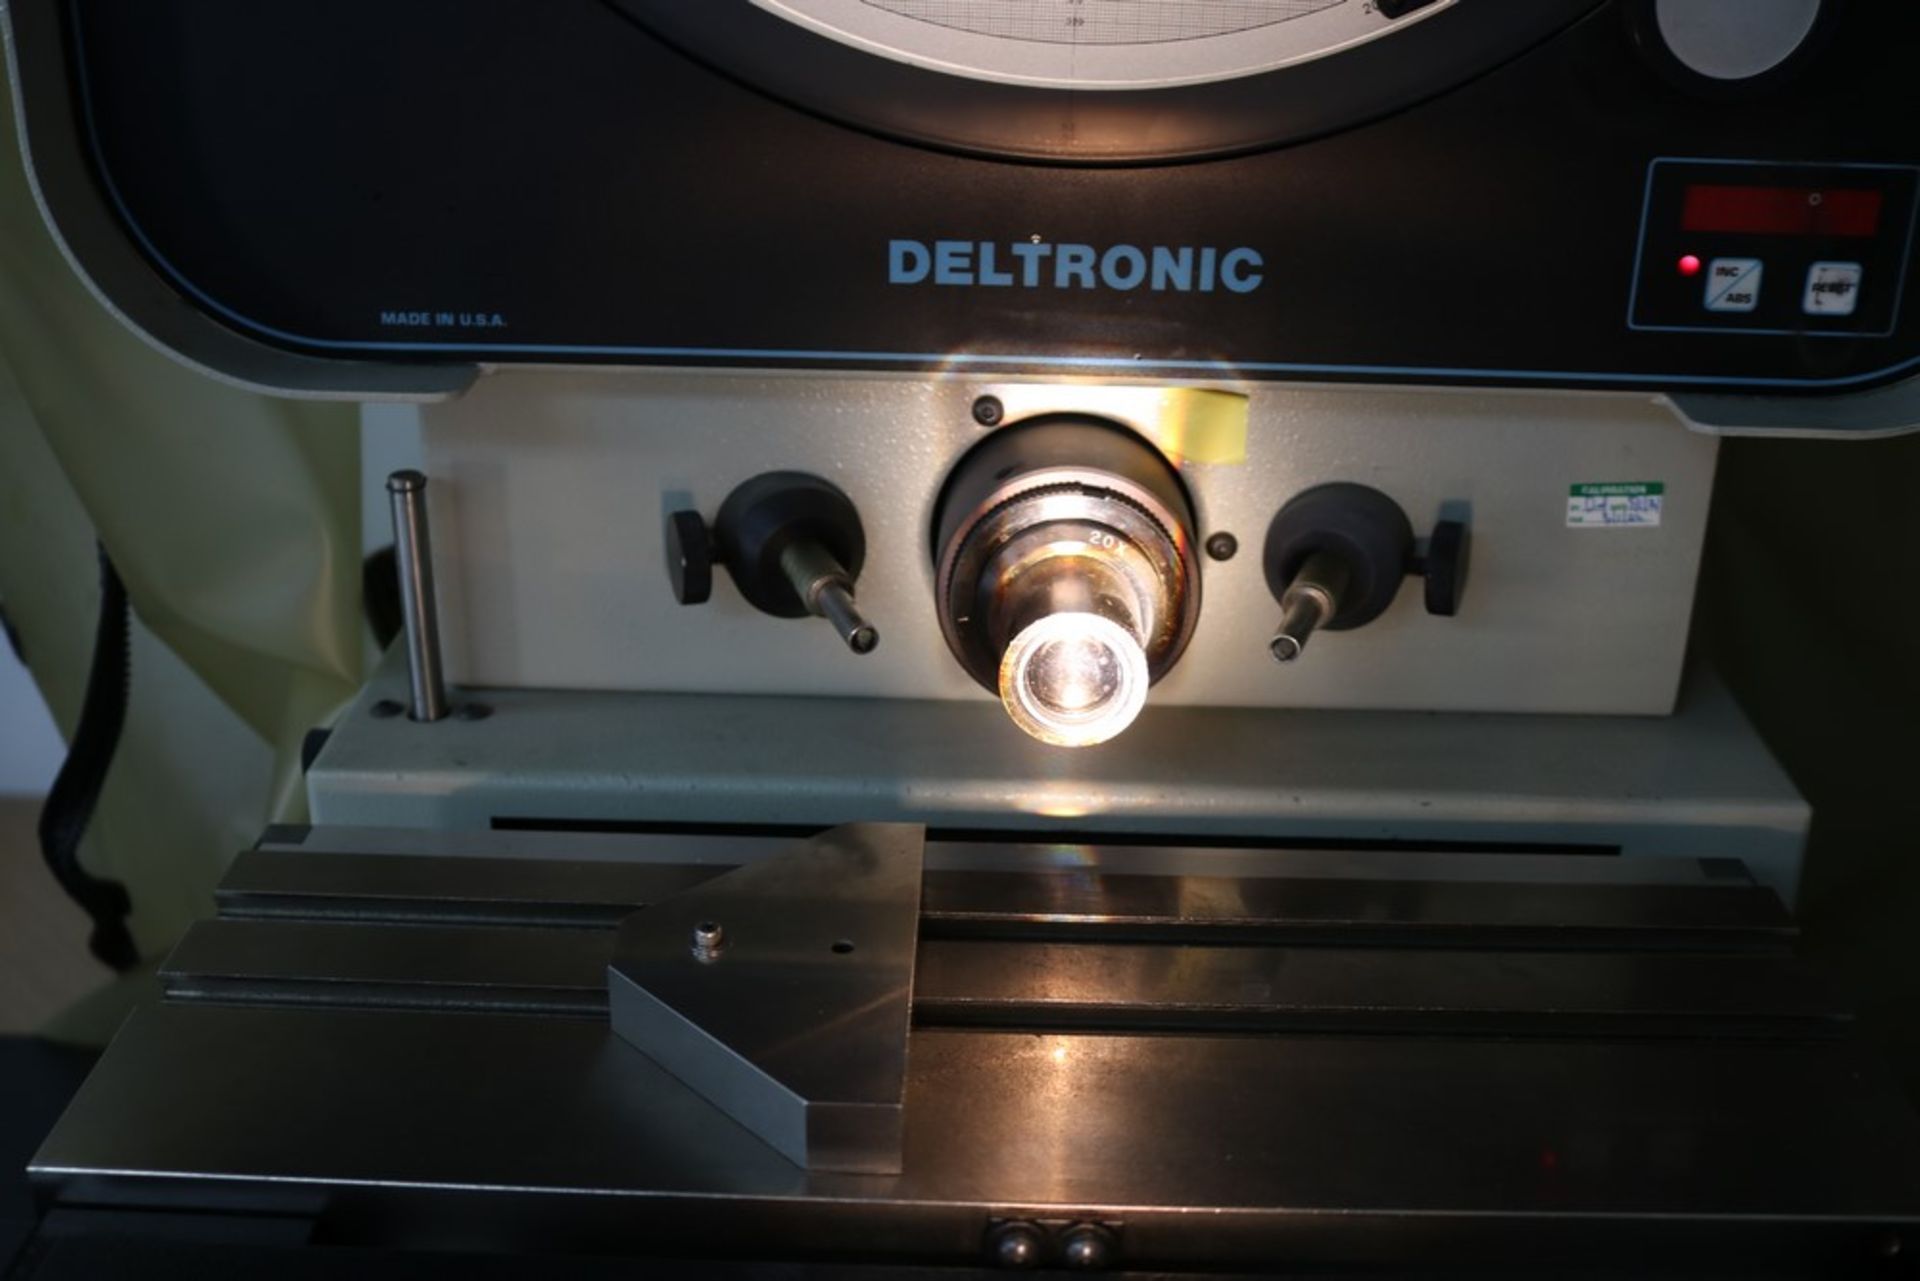 Deltronic DH214 Optical Comparitor with Deltronic 612-R DRO Includes Inspection Accessories - Image 5 of 9